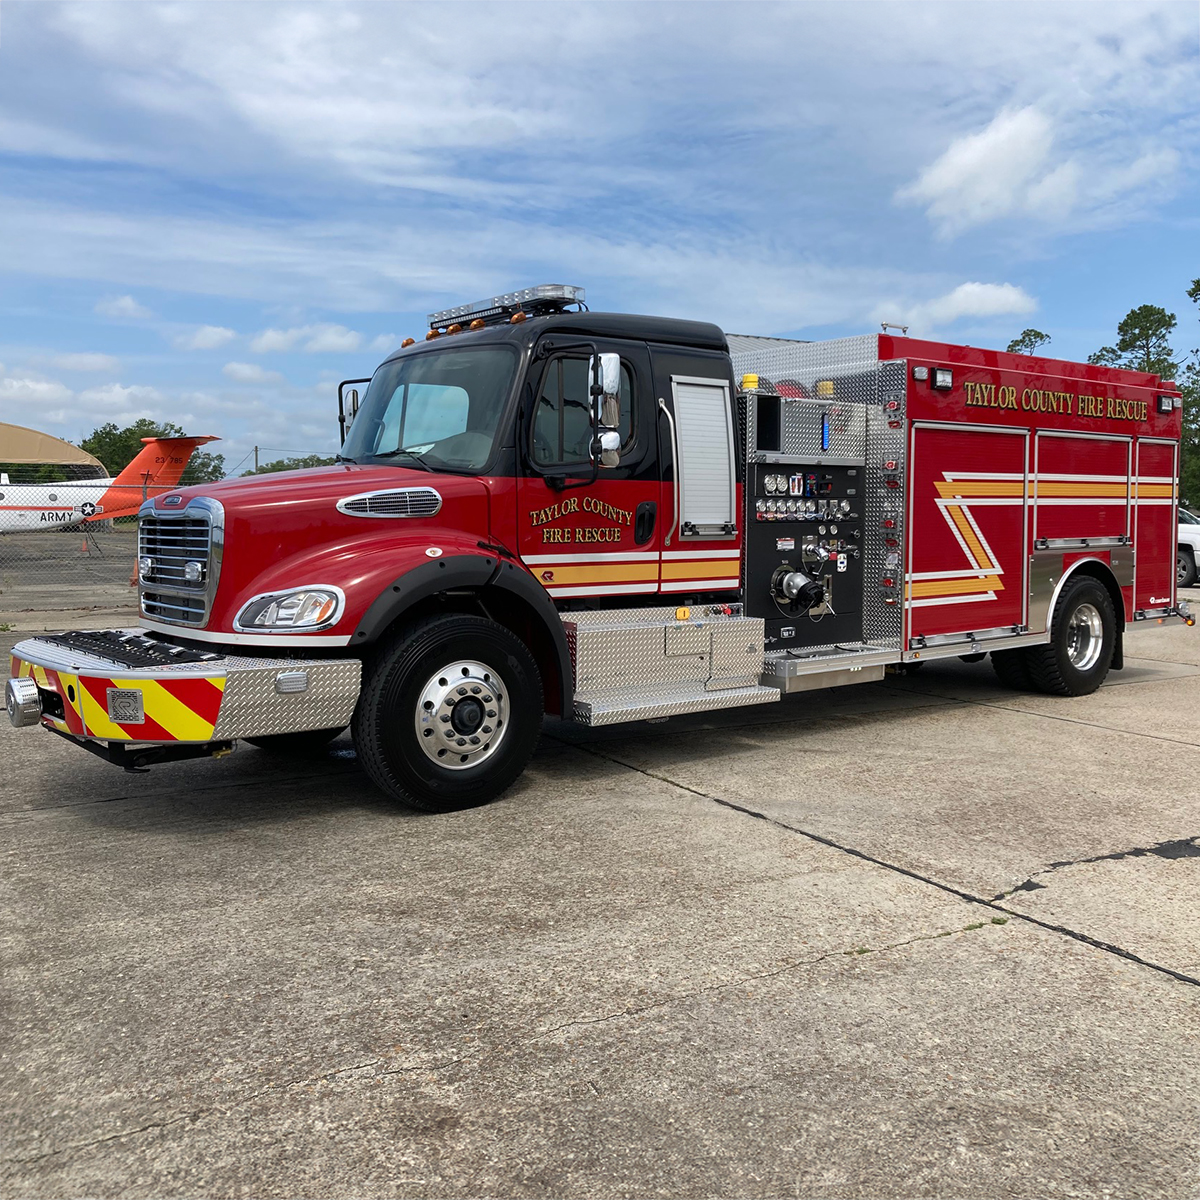 Taylor County Fire Department (FL)